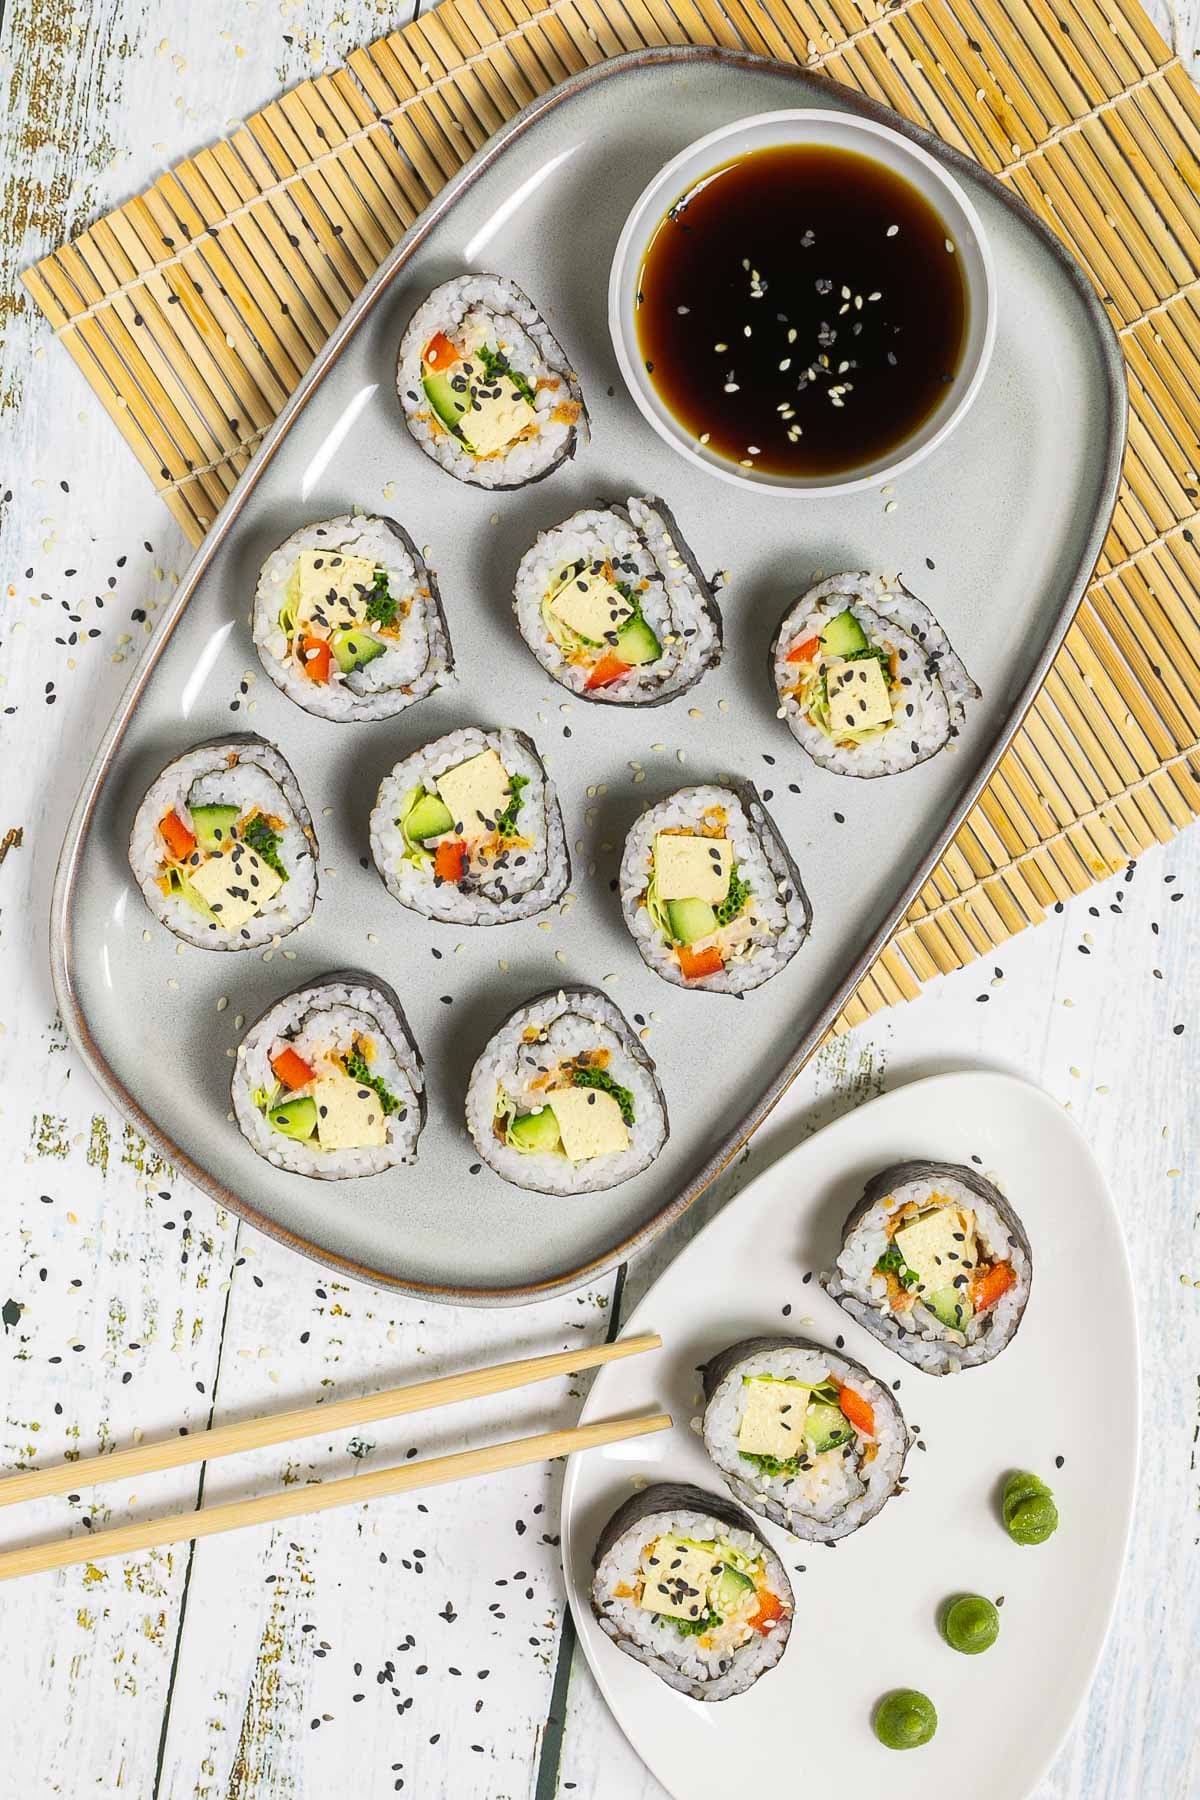 An oval, light blue plate with 9 tofu sushi rolls with colorful filling wrapped in dark seaweed sheets. Served with a small bowl of soy sauce and sprinkled with dark and white sesame seeds.